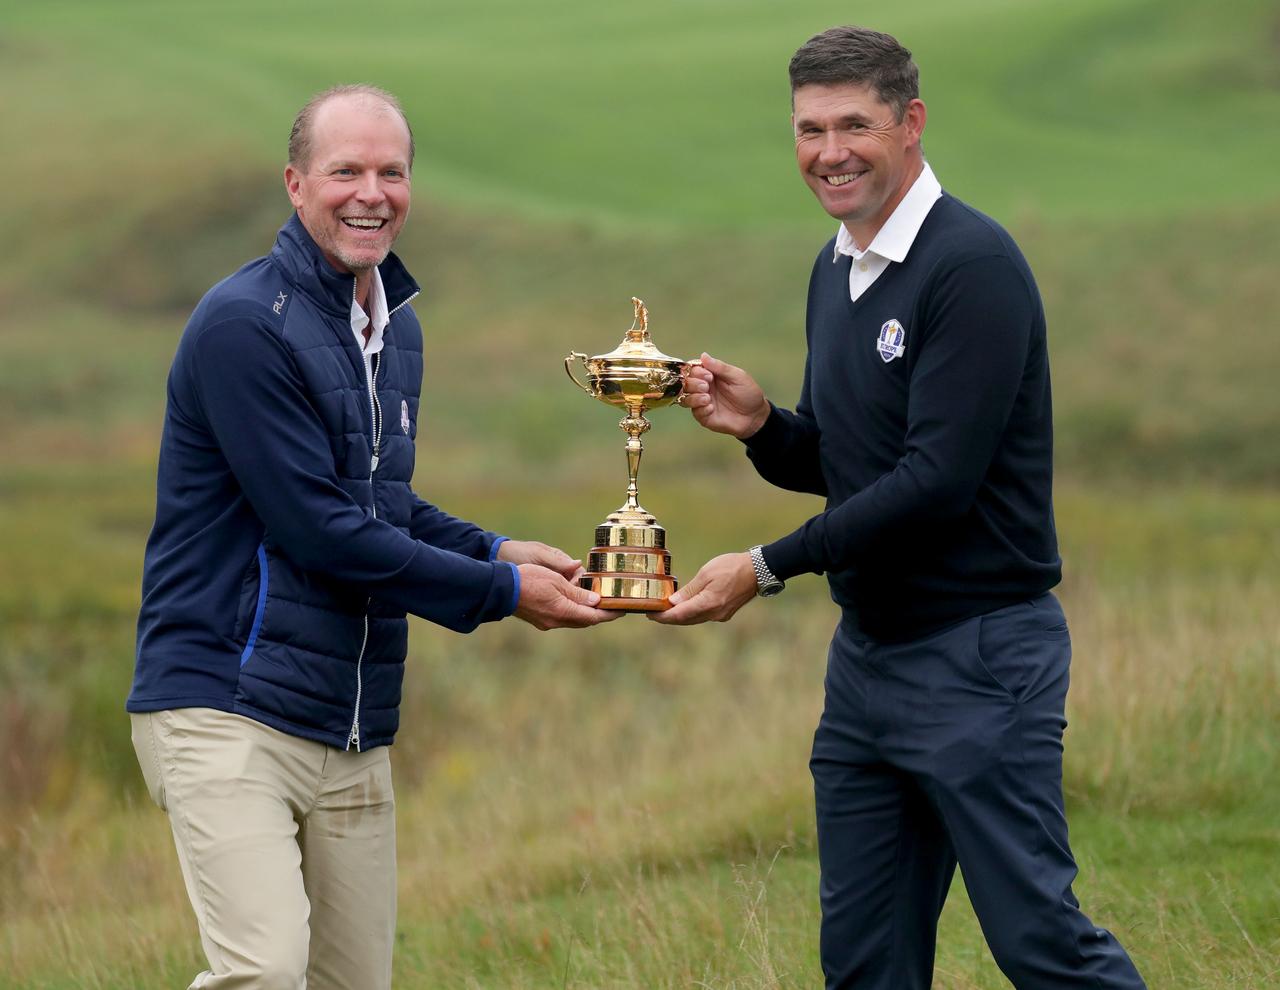 three of the year s four majors have been rescheduled and the british open has been cancelled but the ryder cup is scheduled photo afp